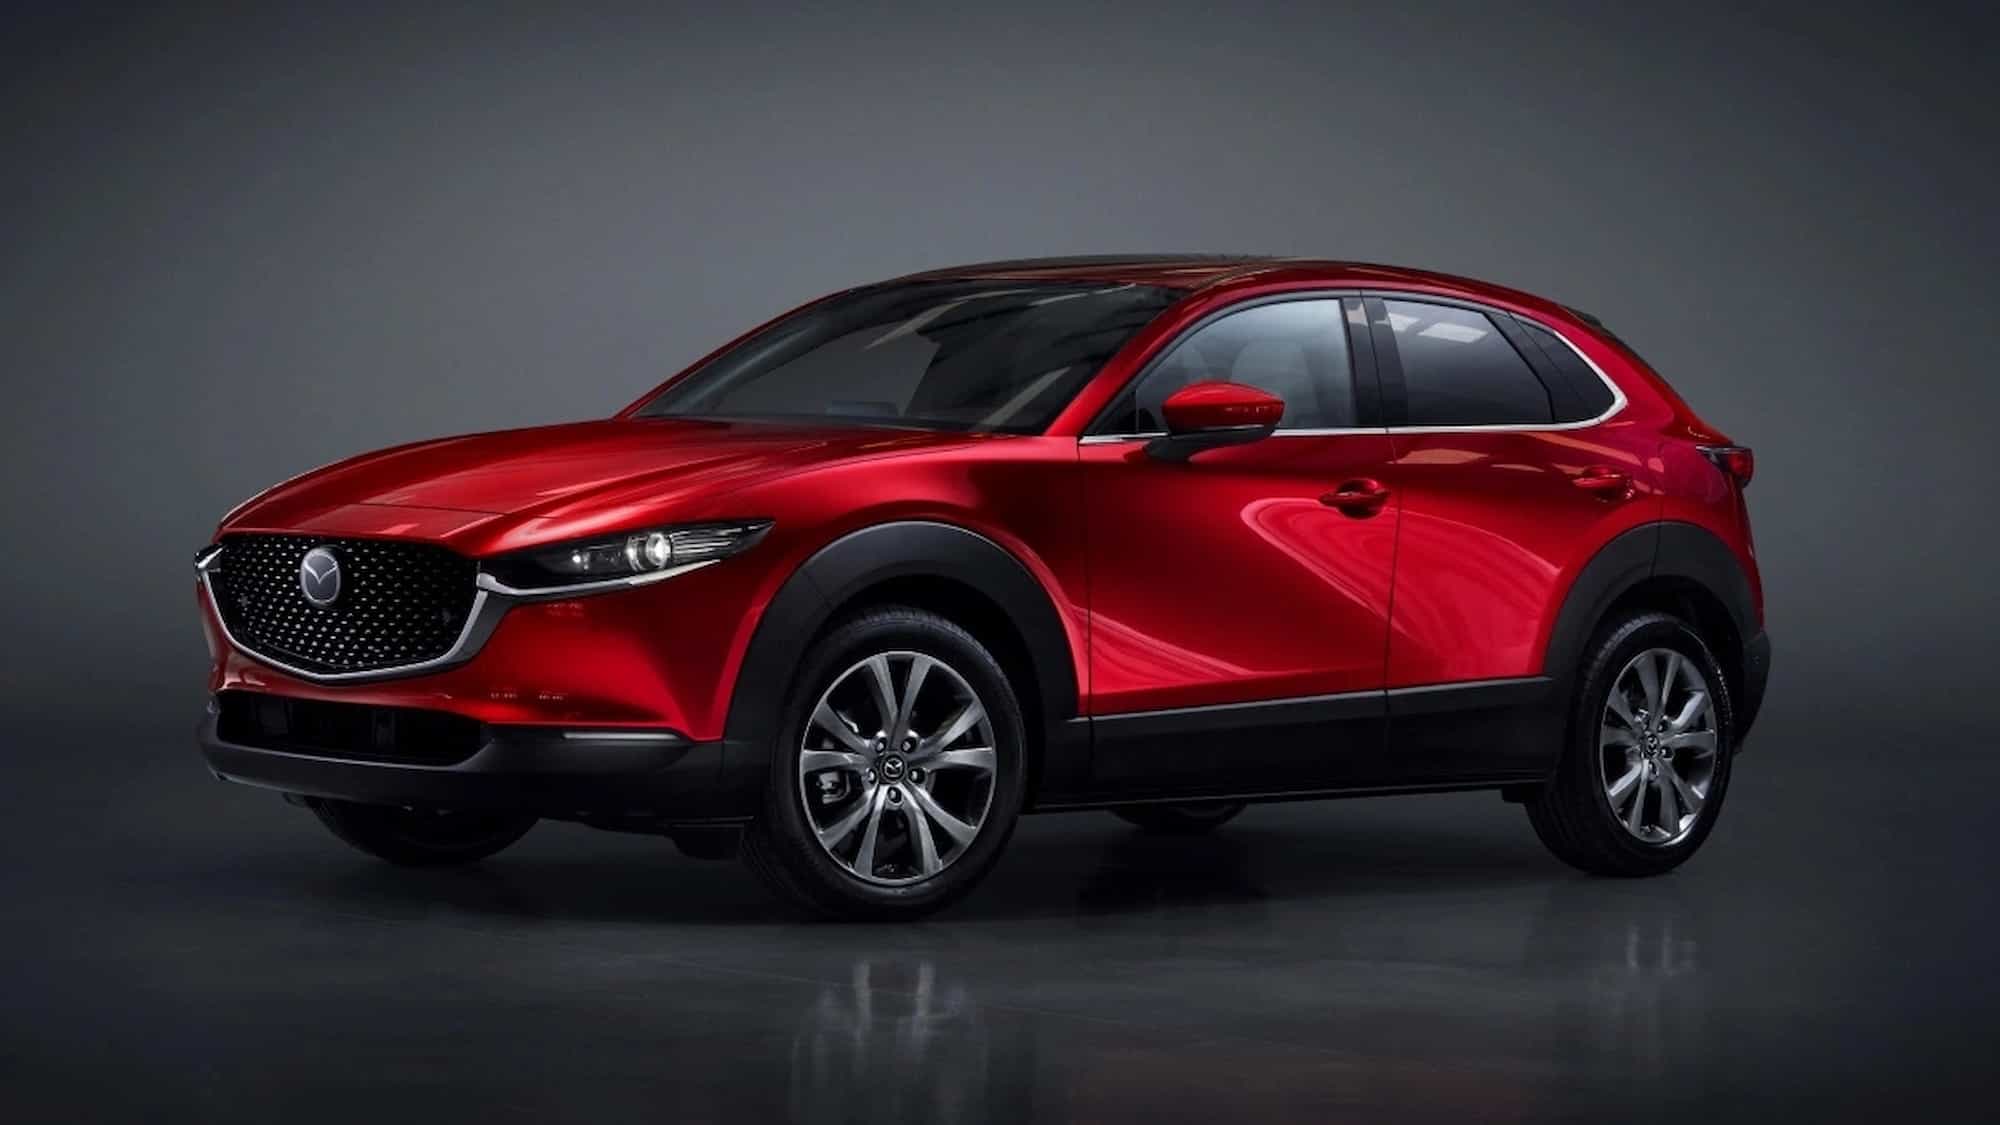 Front angle view of red 2023 Mazda CX 30 cheapest new Mazda SUV and best subcompact